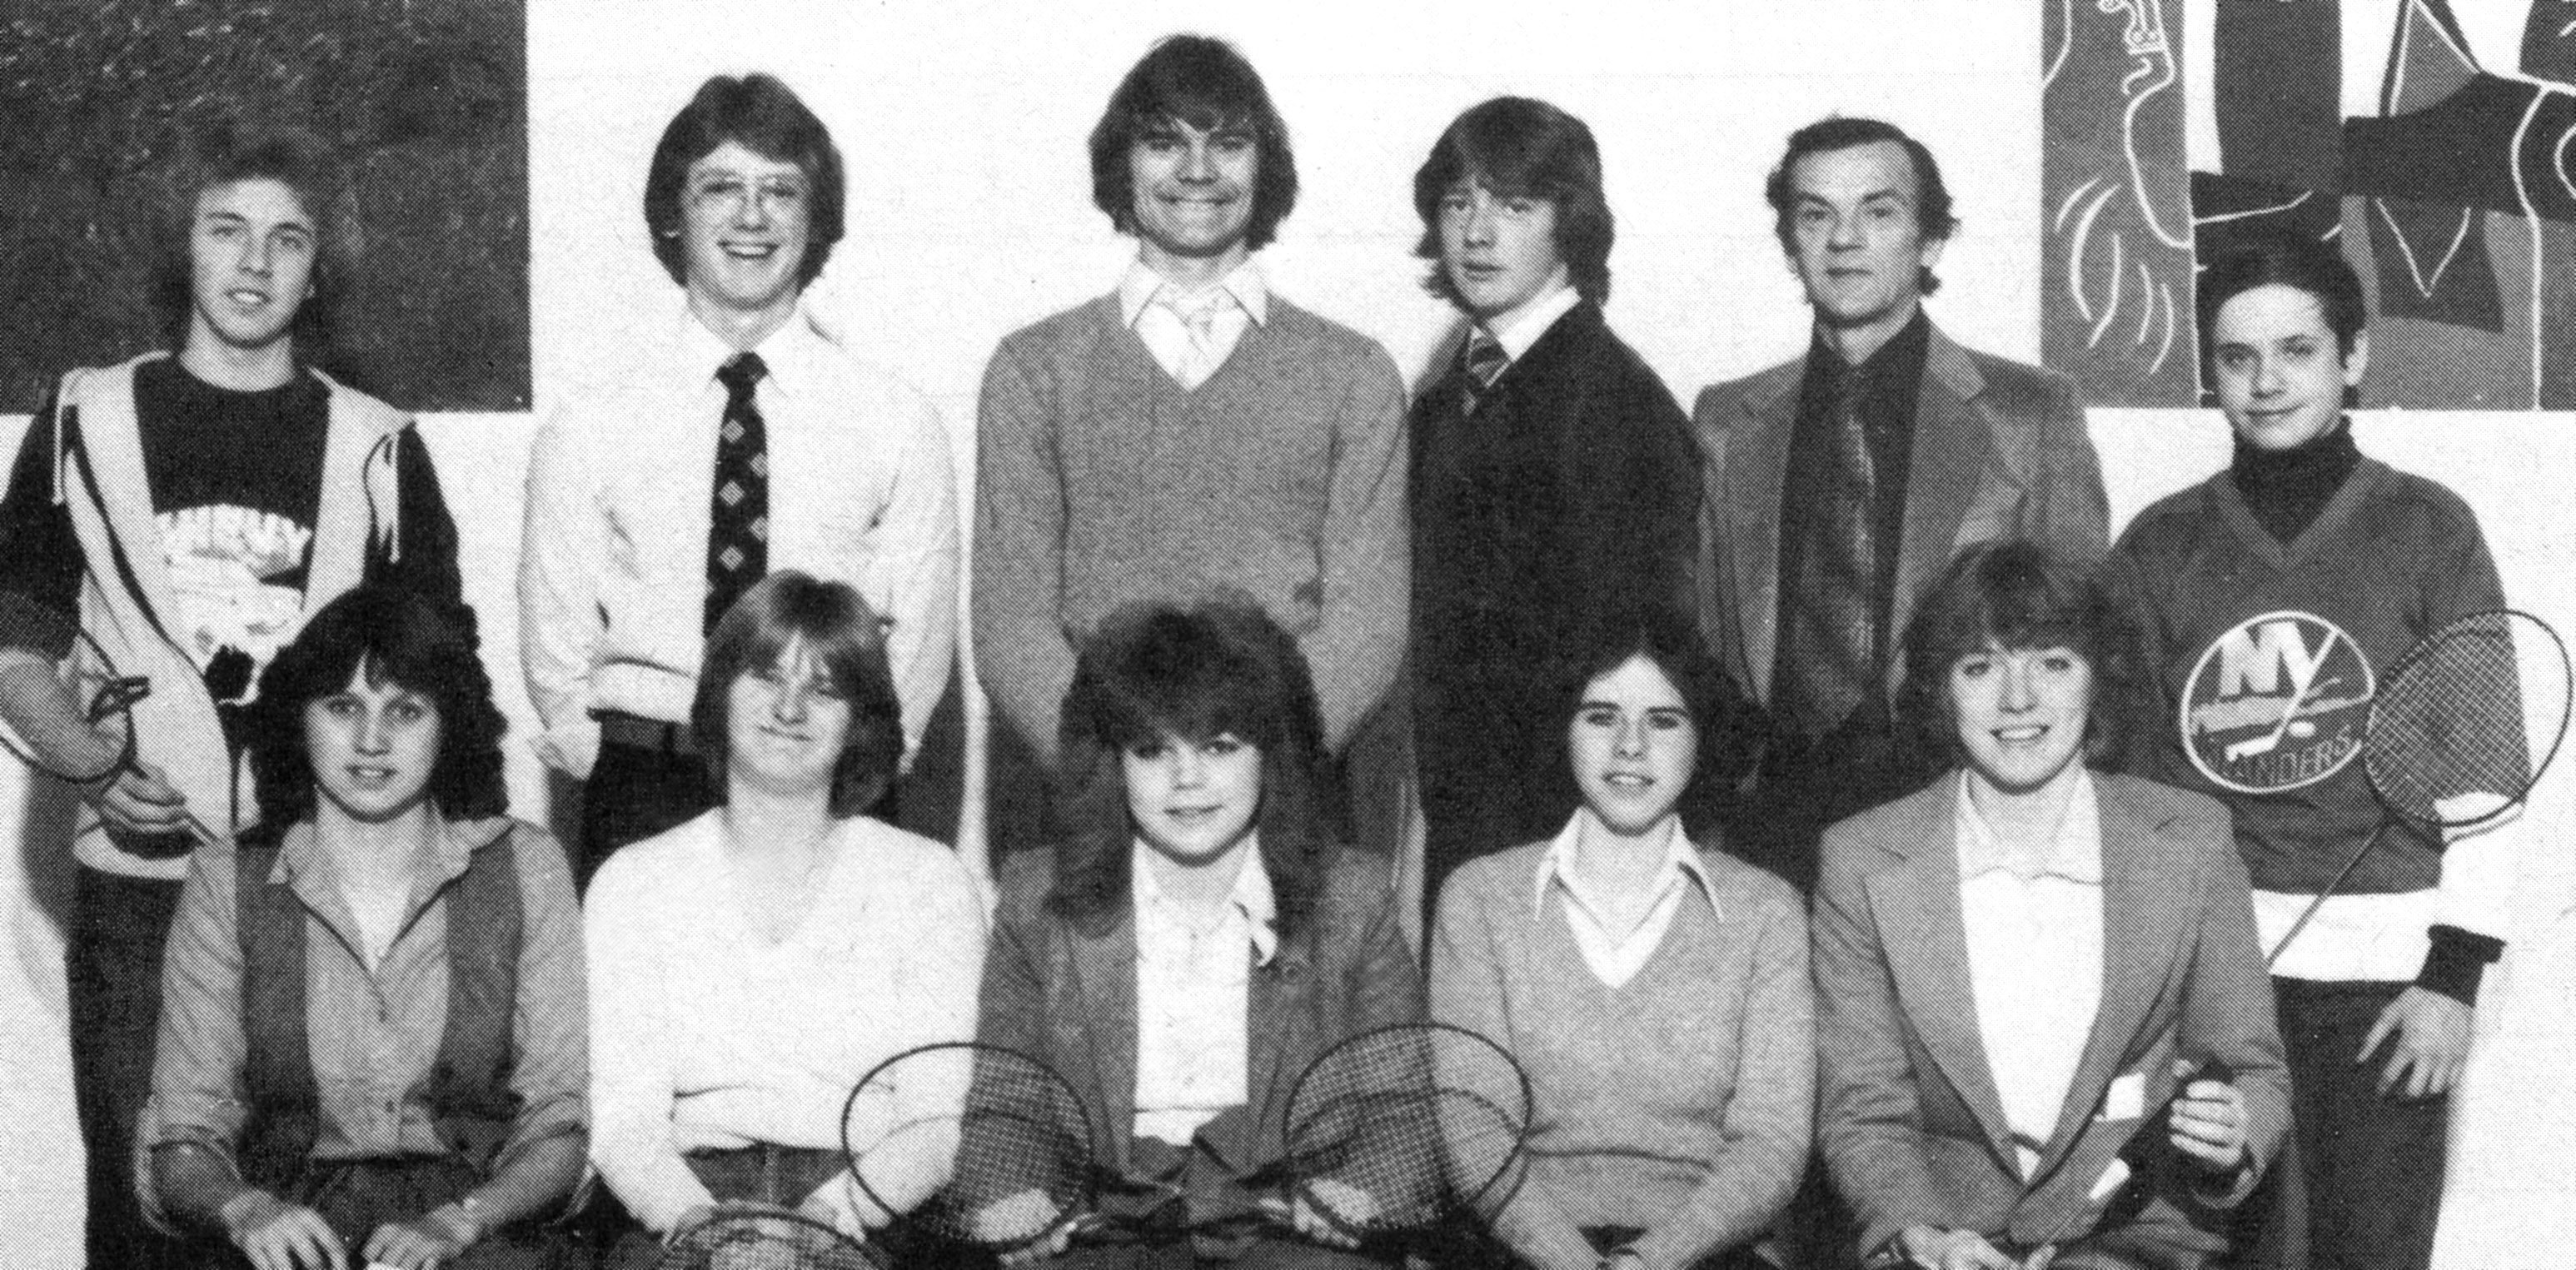 (Click to magnify) FRONT ROW: Terri Whitmarsh, Chris Dechert, Dianne Morrison, Jackie Gilkes, Sandi Friedrich; ***BACK ROW: Pat Mikuse, Dave Fisher, Russell Joosten, Mike Fisher, Mr. N. Reed (coach), Donald Archibald; ABSENT: Paul Shepherd, Andy Pateman, 